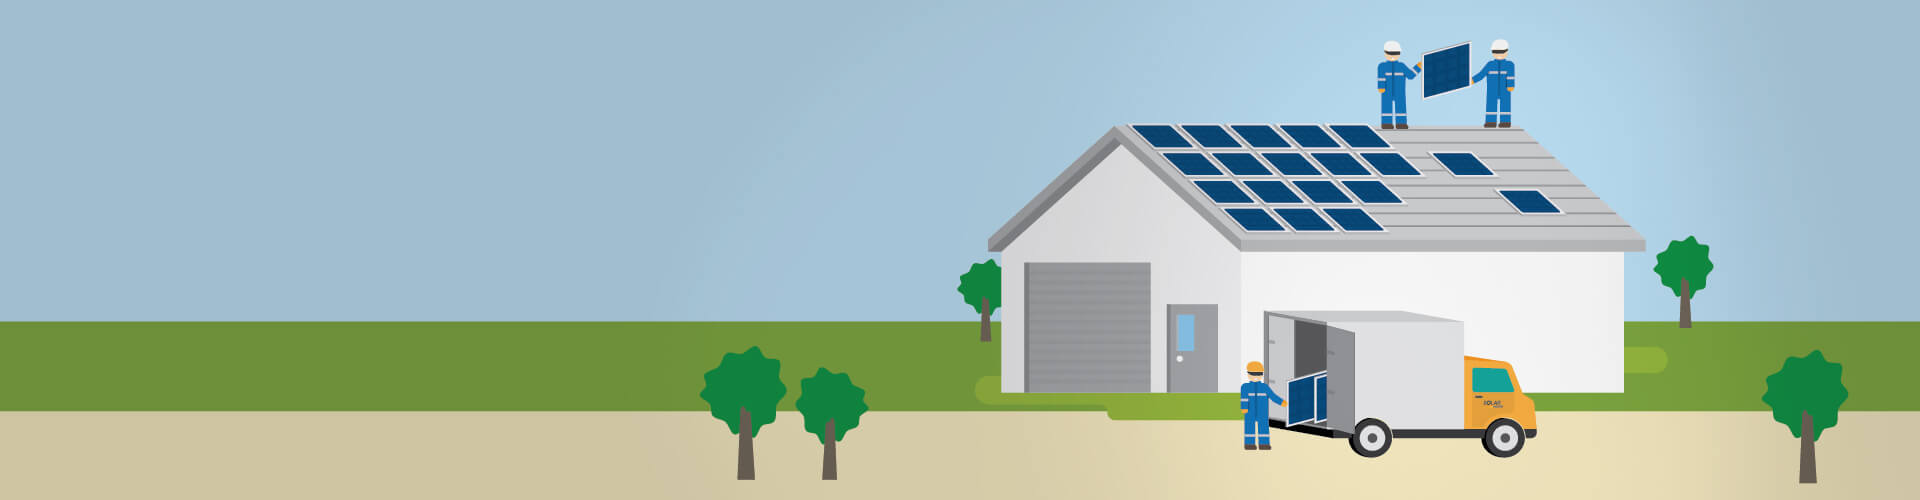 Learn more about solar panel reliability – Maximize your solar power potential